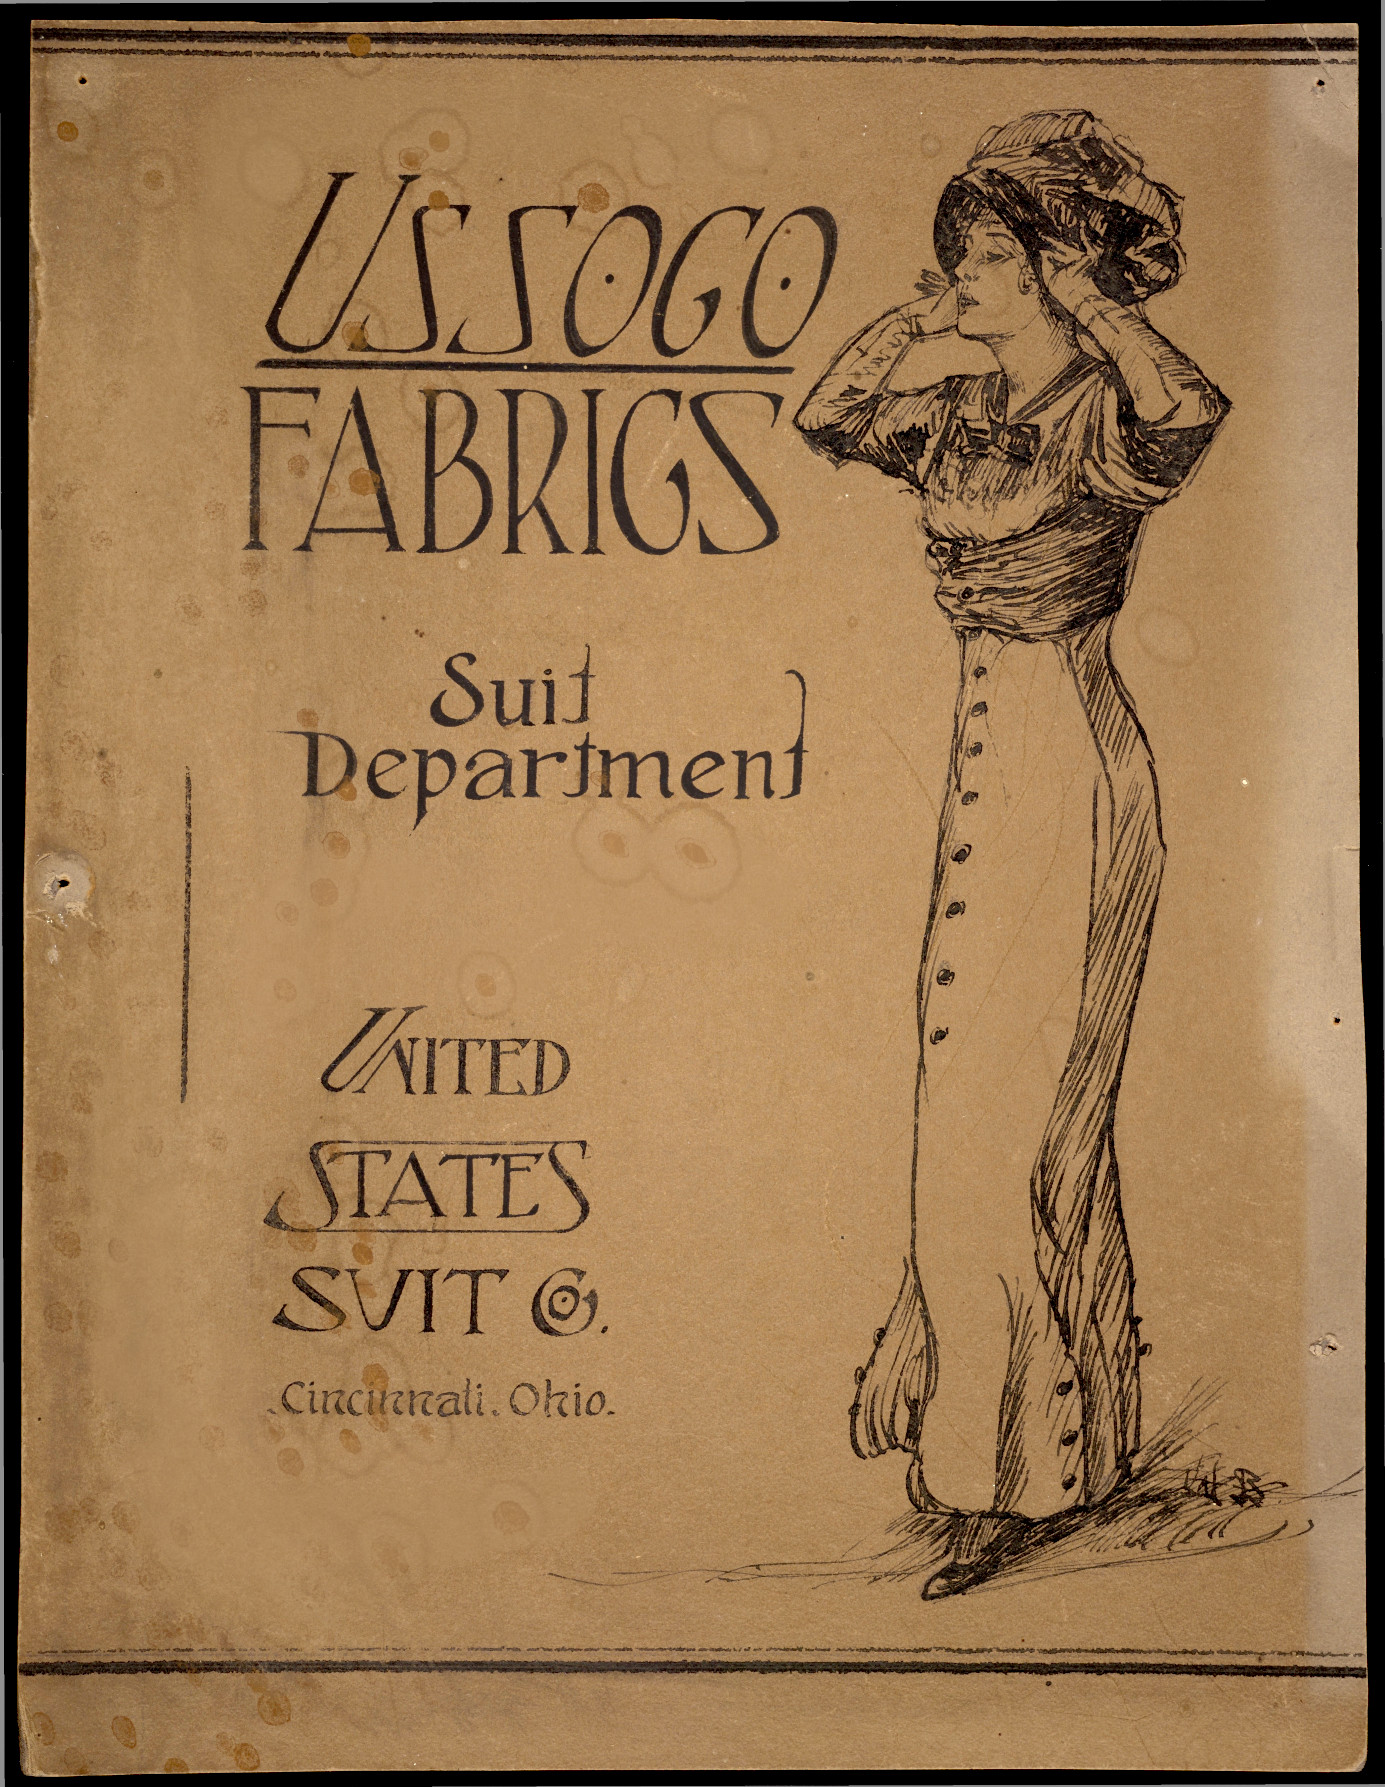 advertisement for a suit department